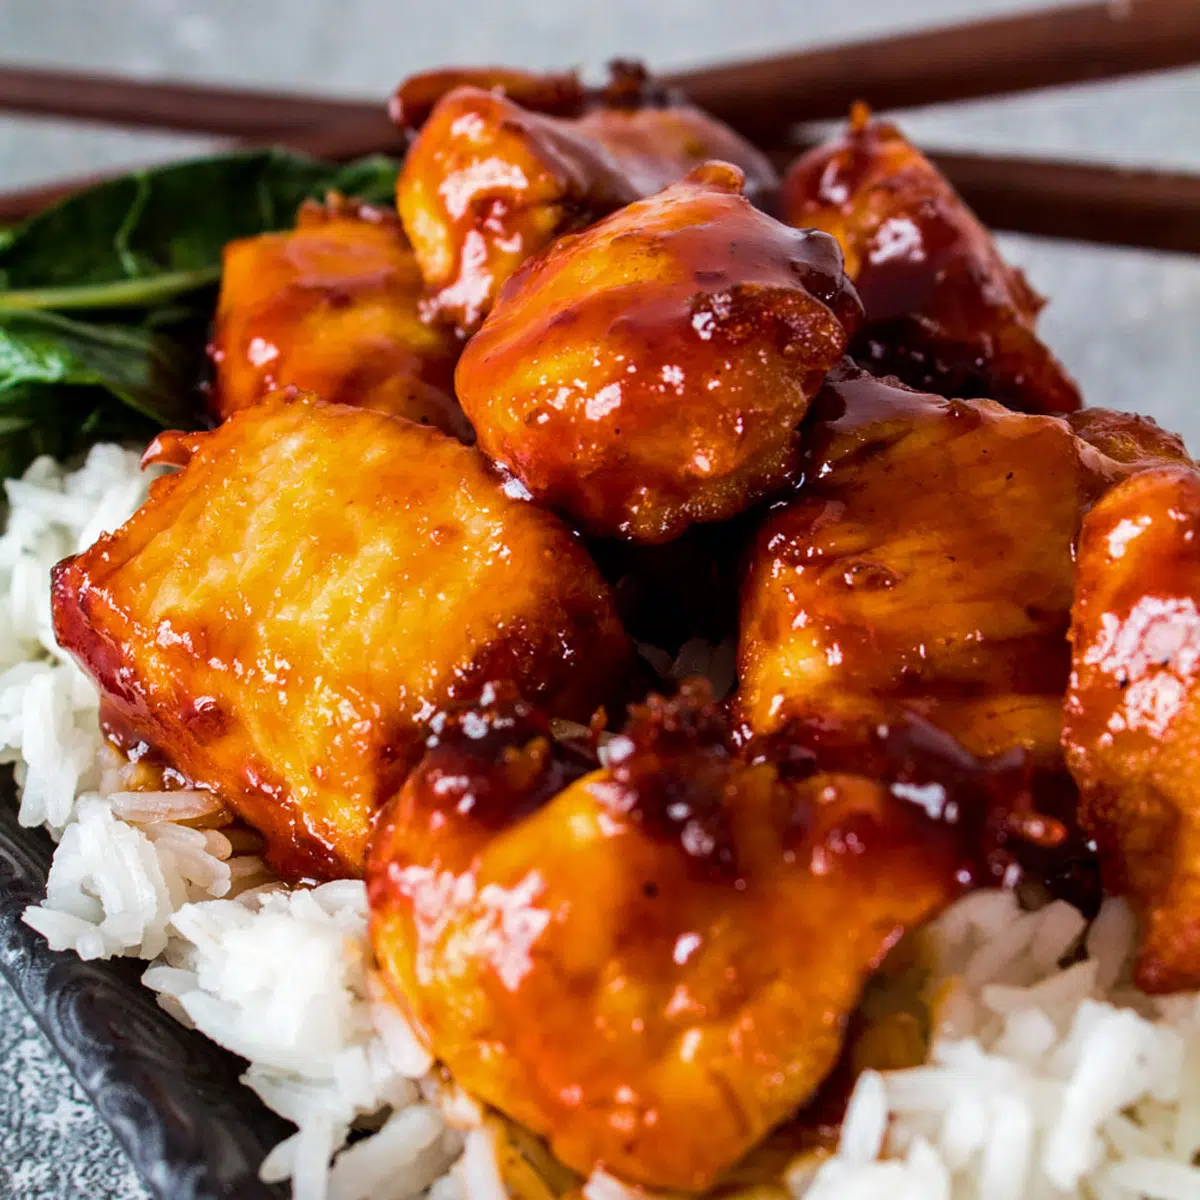 General Tso's chicken served over steamed rice with bok choy.